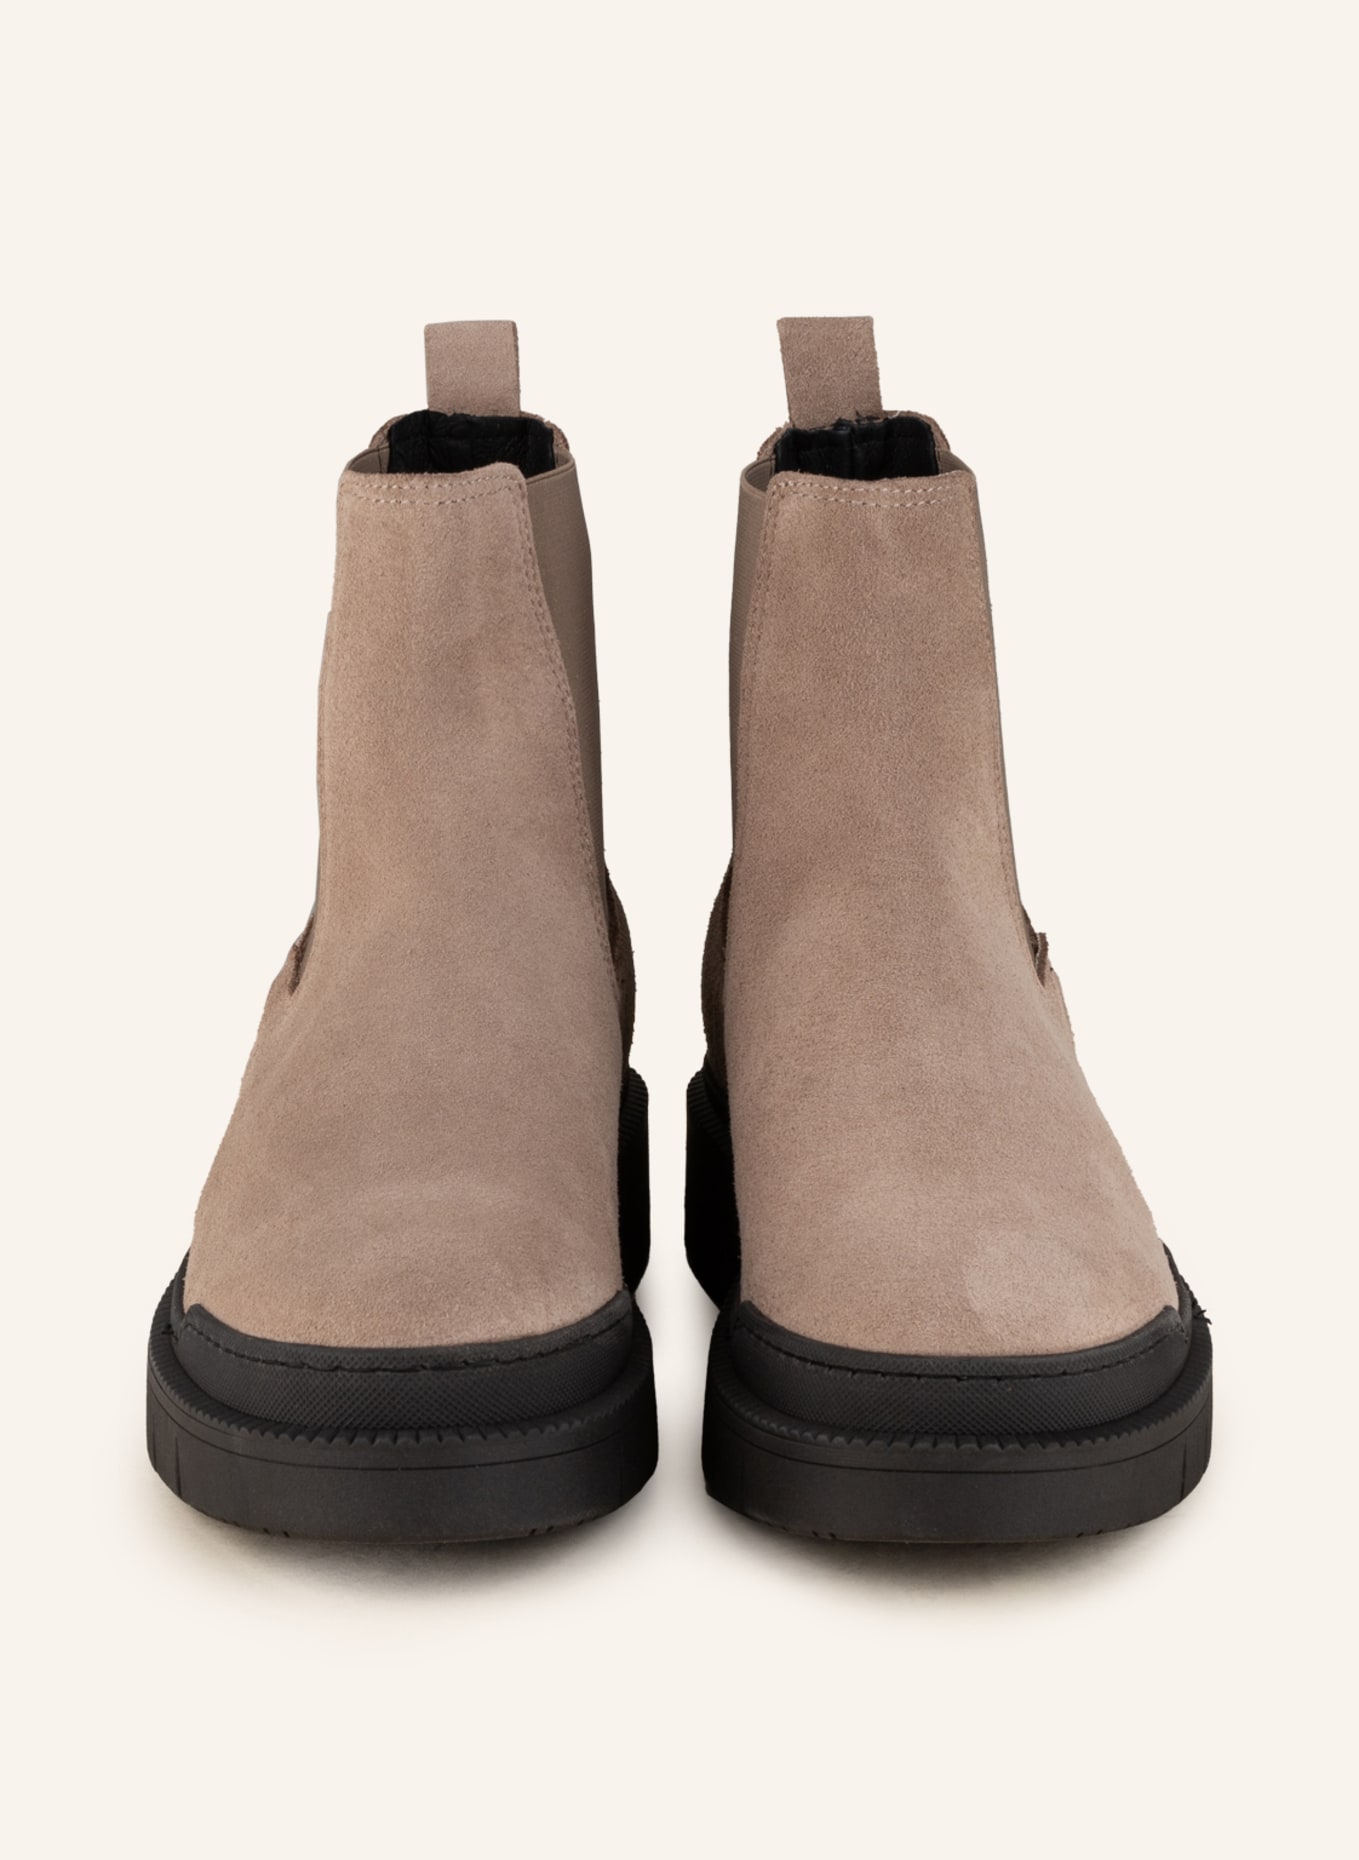 PAUL Chelsea-Boots, Farbe: TAUPE (Bild 3)